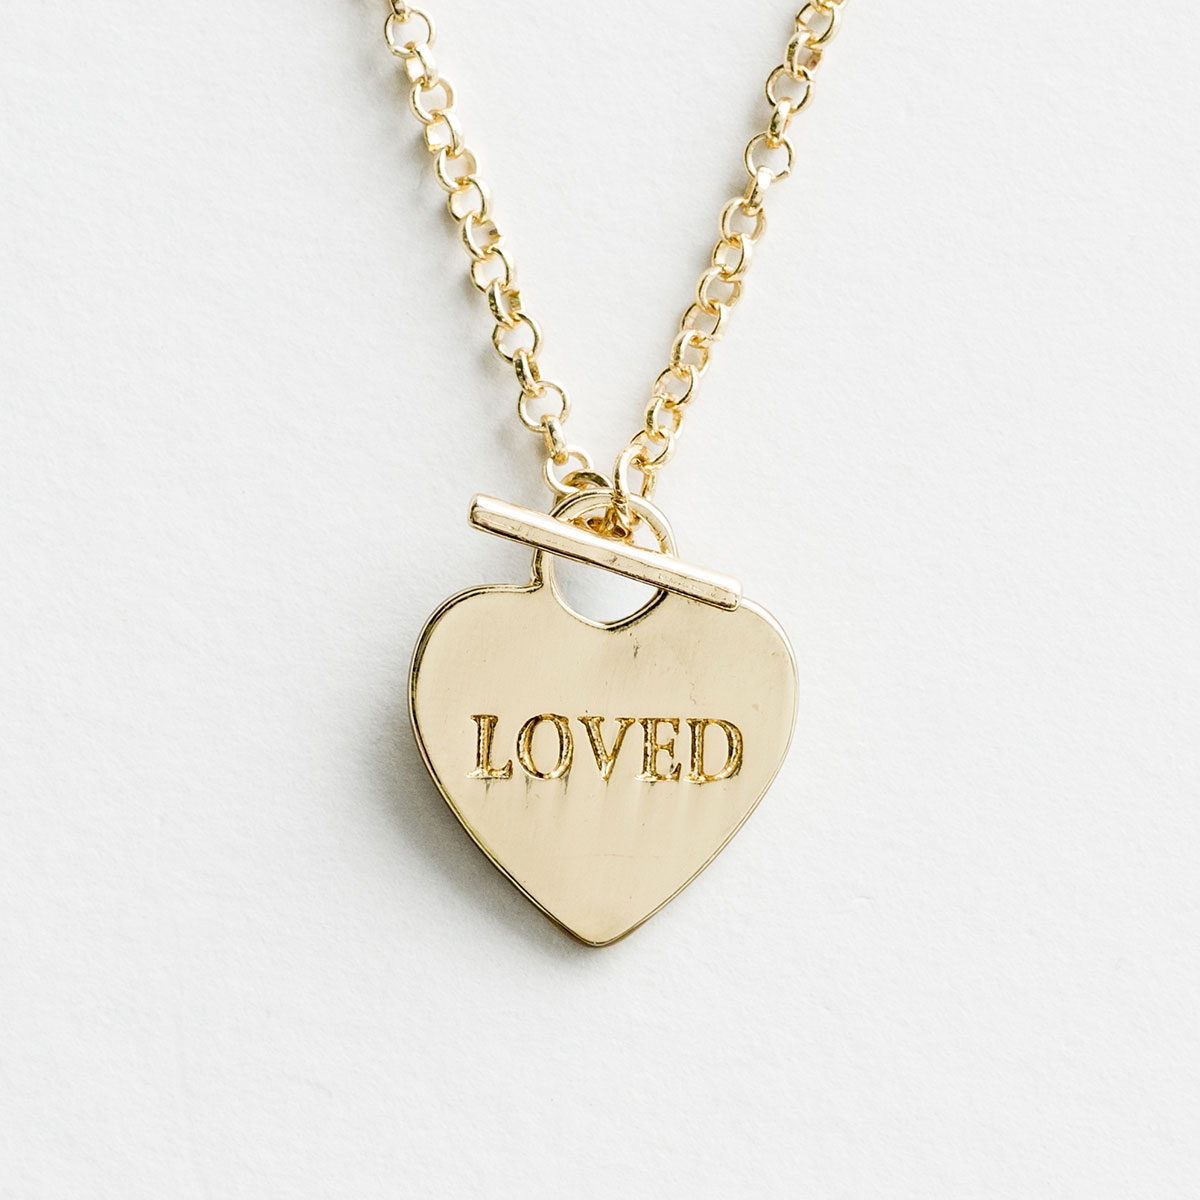 The Loved Gold Identity Child Necklace